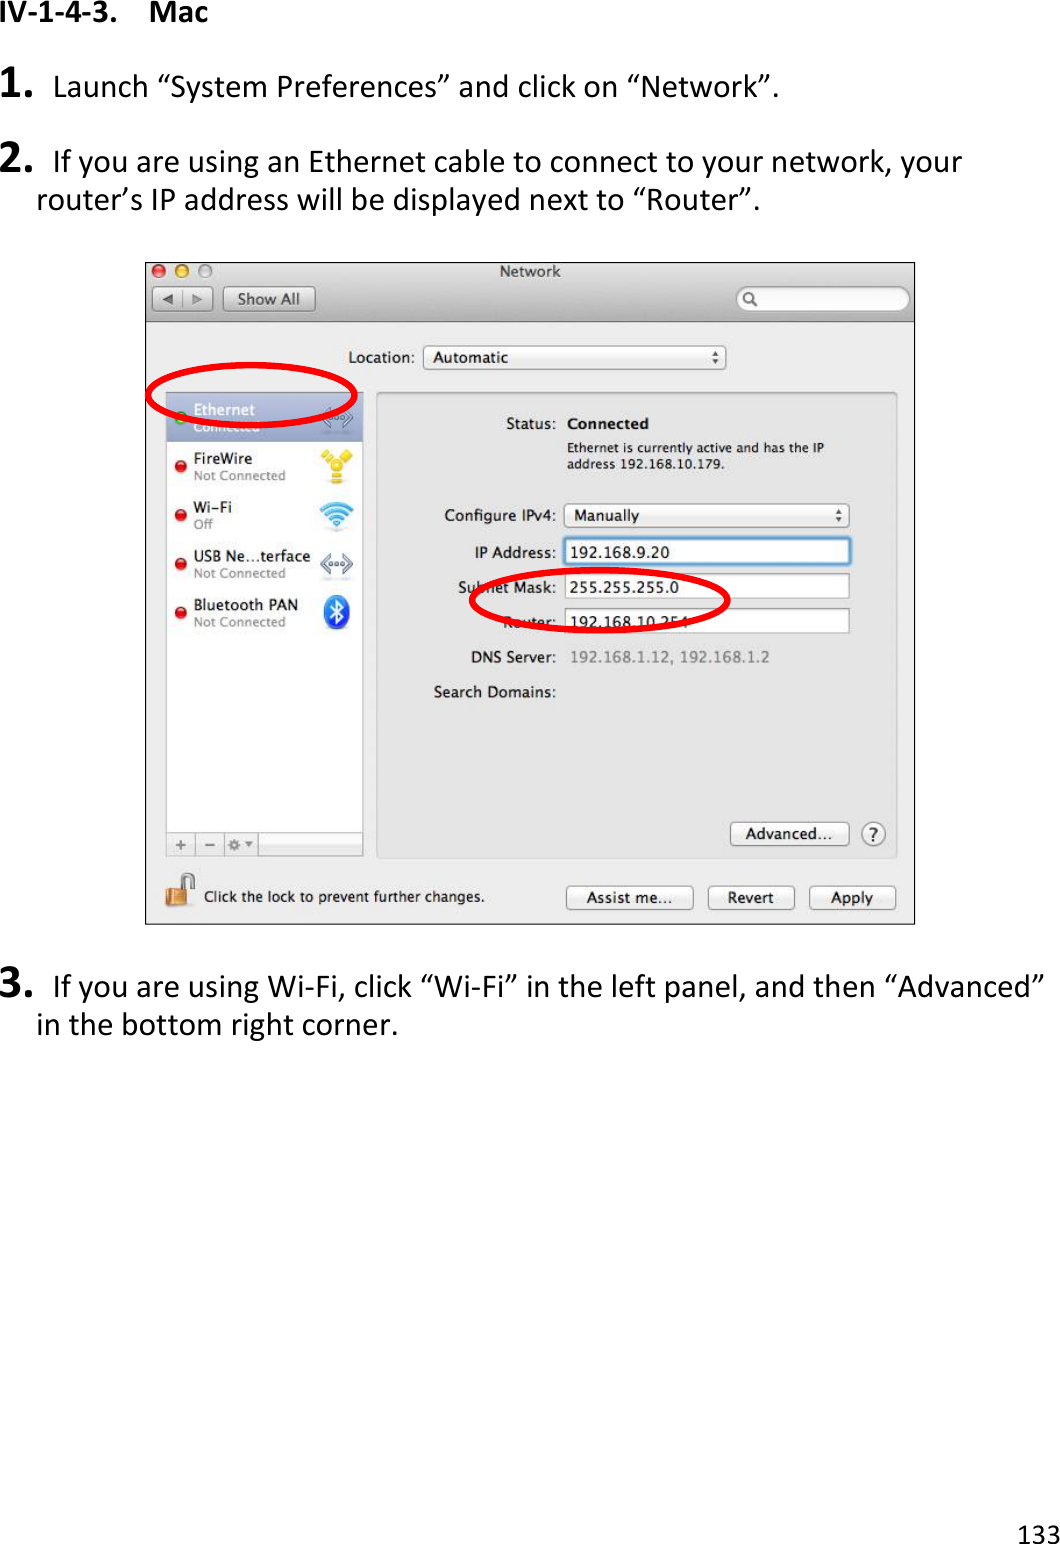 133  IV-1-4-3.  Mac  1.   Launch “System Preferences” and click on “Network”.  2.   If you are using an Ethernet cable to connect to your network, your router’s IP address will be displayed next to “Router”.    3.   If you are using Wi-Fi, click “Wi-Fi” in the left panel, and then “Advanced” in the bottom right corner.  